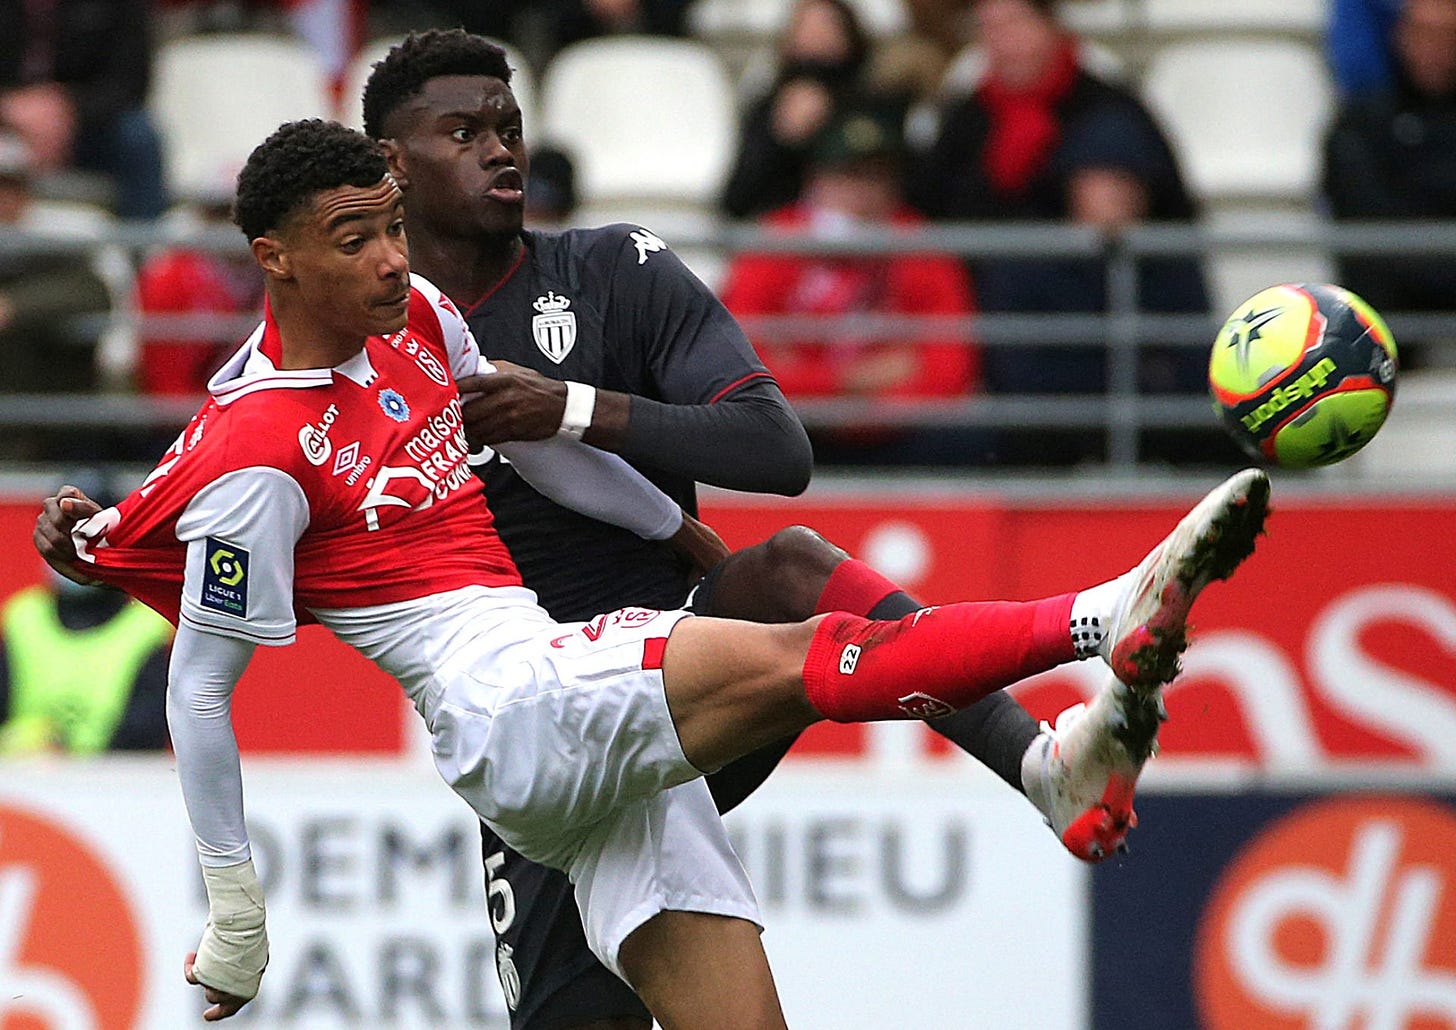 Reims' French forward Hugo Ekitike (L) fights for the ball with Monaco's French defender Benoit Badiashile Mukinayi (R)  during the French L1 football match between Stade de Reims and AS Monaco at Stade Auguste-Delaune in Reims, northern France on November 7, 2021. (Photo by FRANCOIS NASCIMBENI / AFP) (Photo by FRANCOIS NASCIMBENI/AFP via Getty Images)